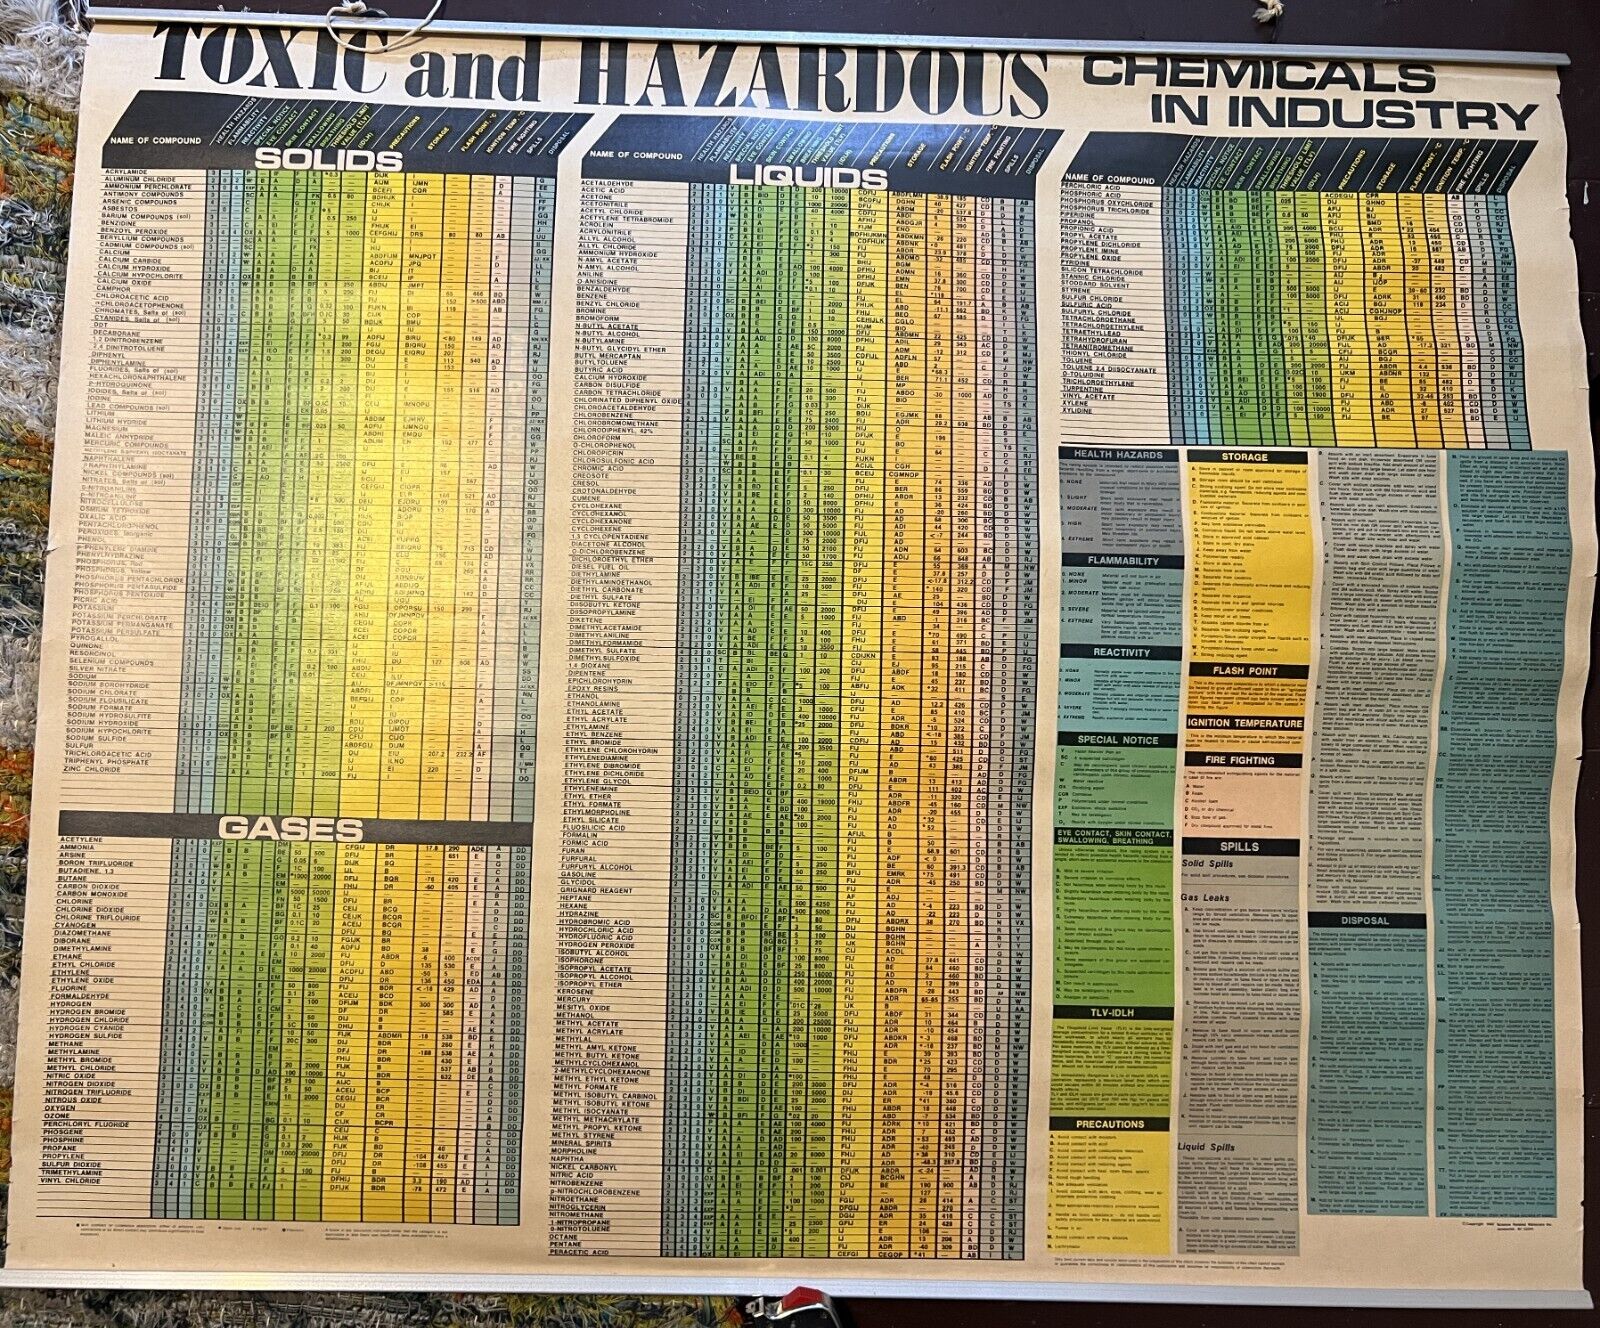 Vintage wall hanging Toxic & Hazardous Chemicals in Industry. Chemistry. 1980.